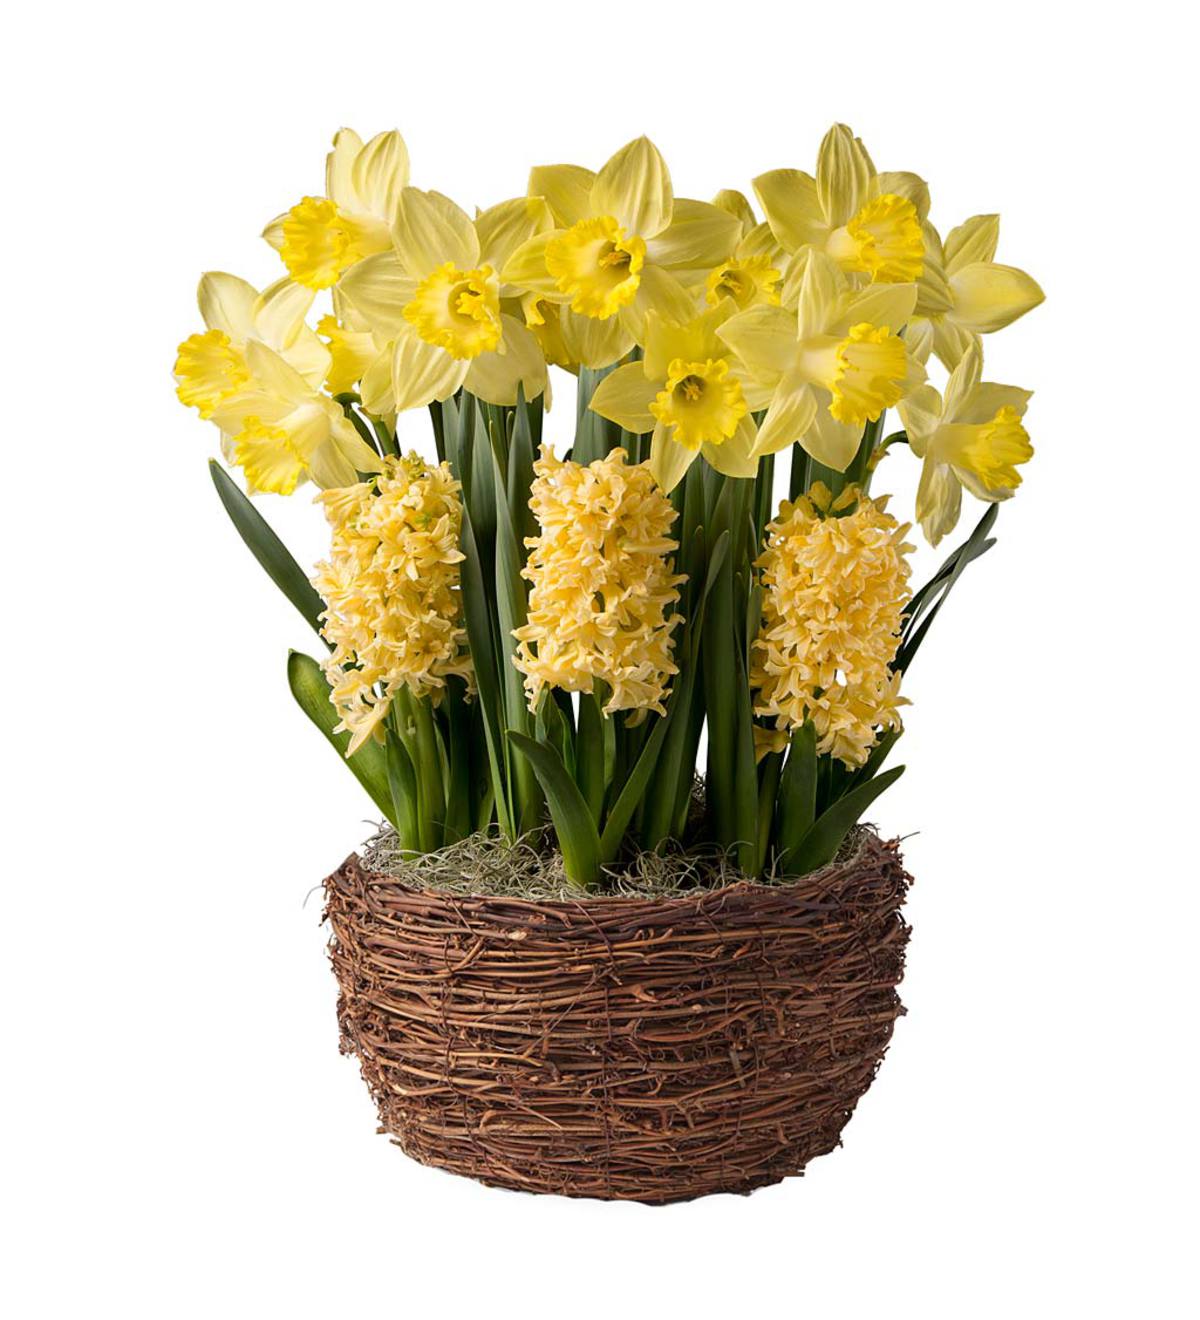 Narcissus and Hyacinth Bulb Garden - Ships January-June 2018